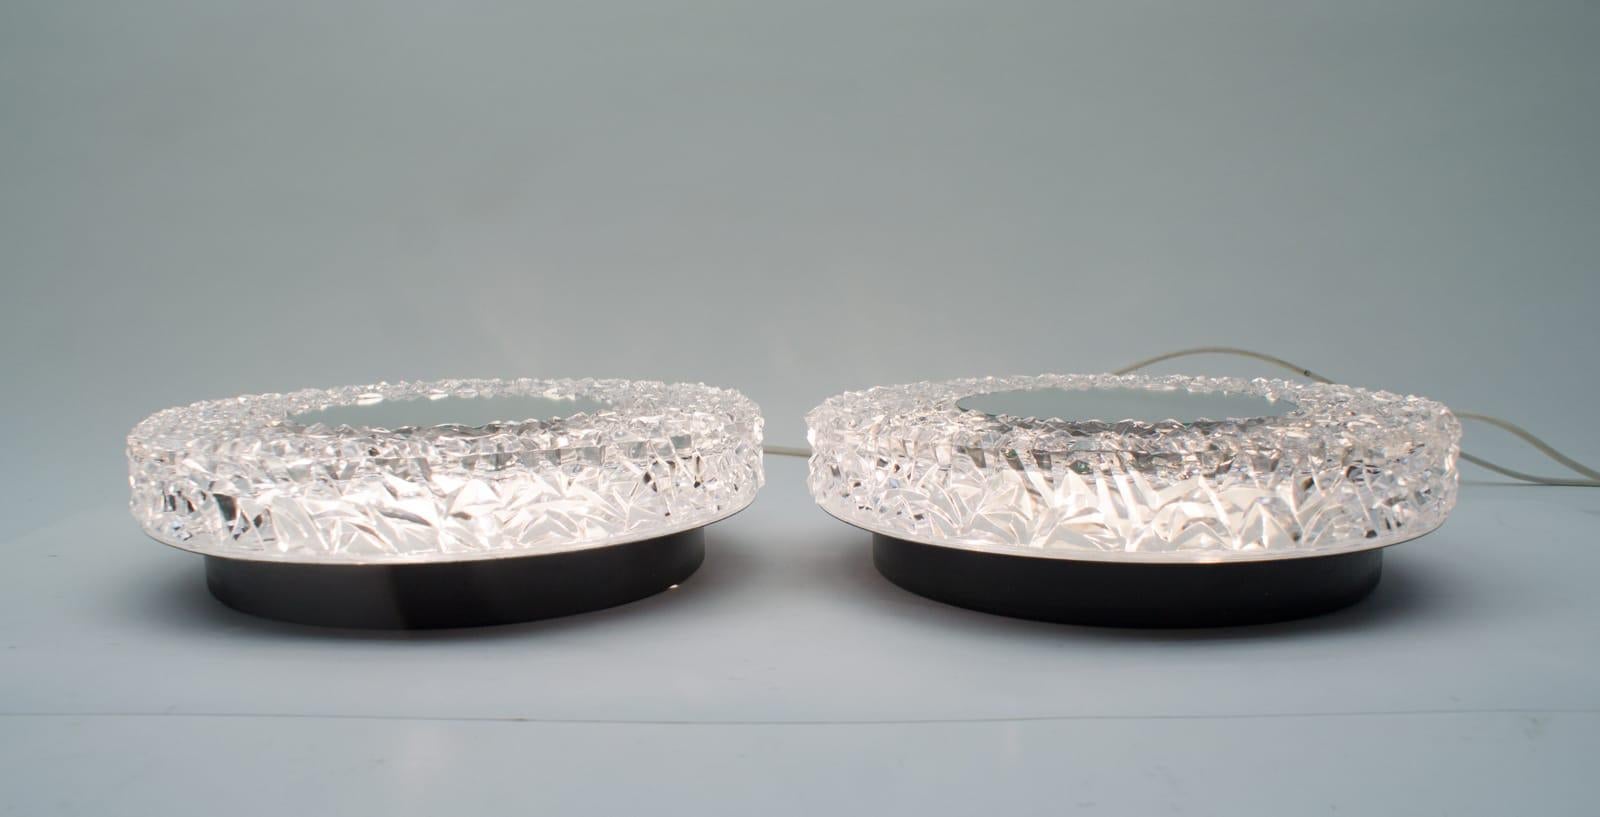 German Set of 2 Textured Glass and Mirror Ceiling Wall Flushmounts, Hillebrand, 1960s For Sale